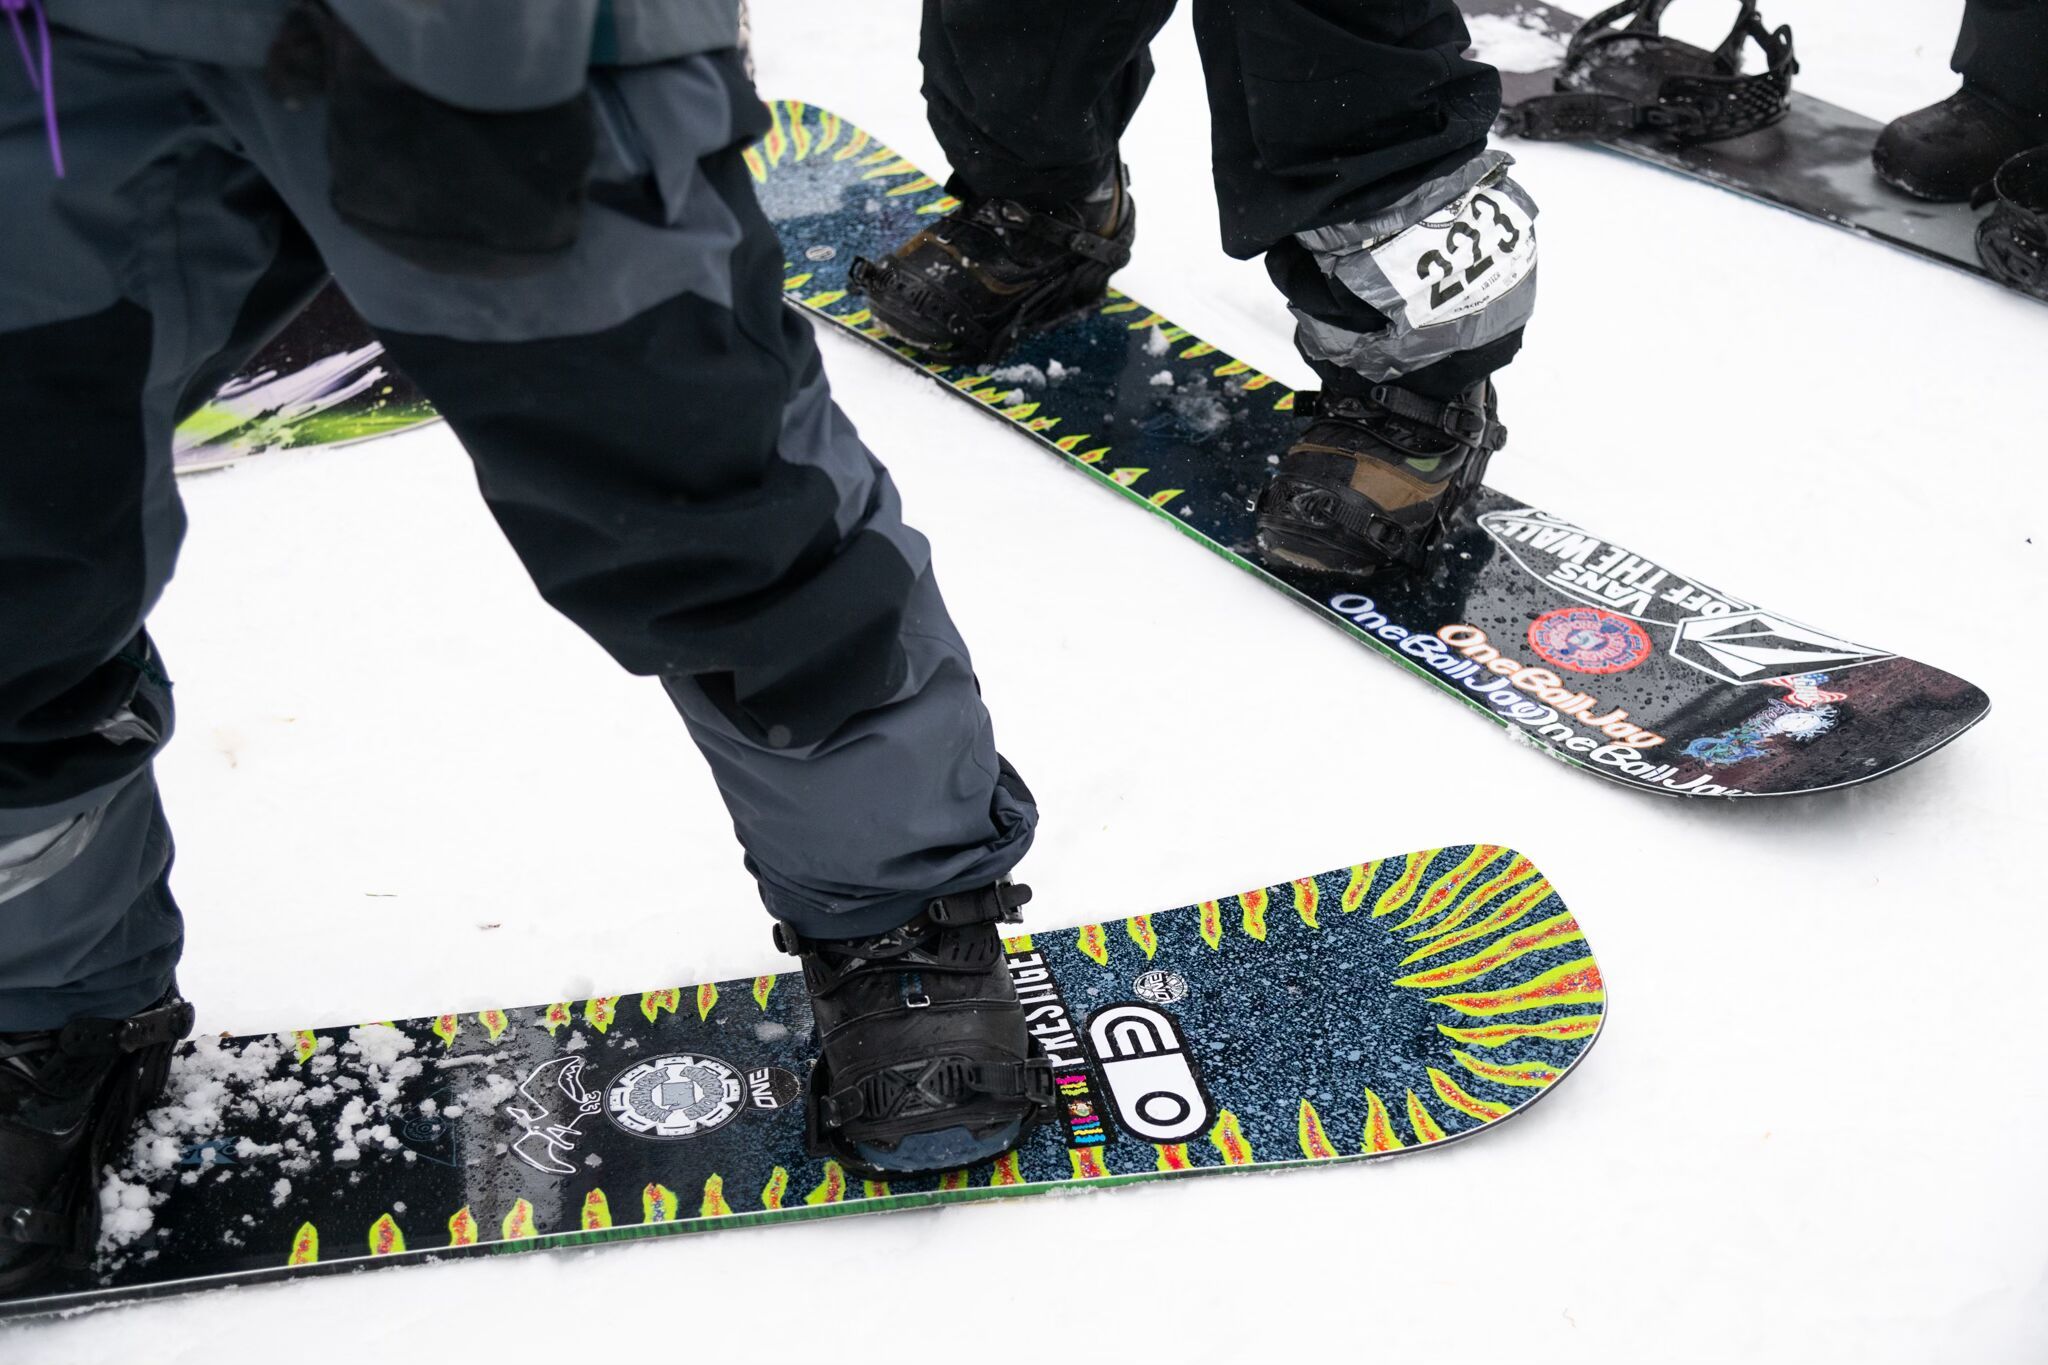 Gnu Banked Country snowboard